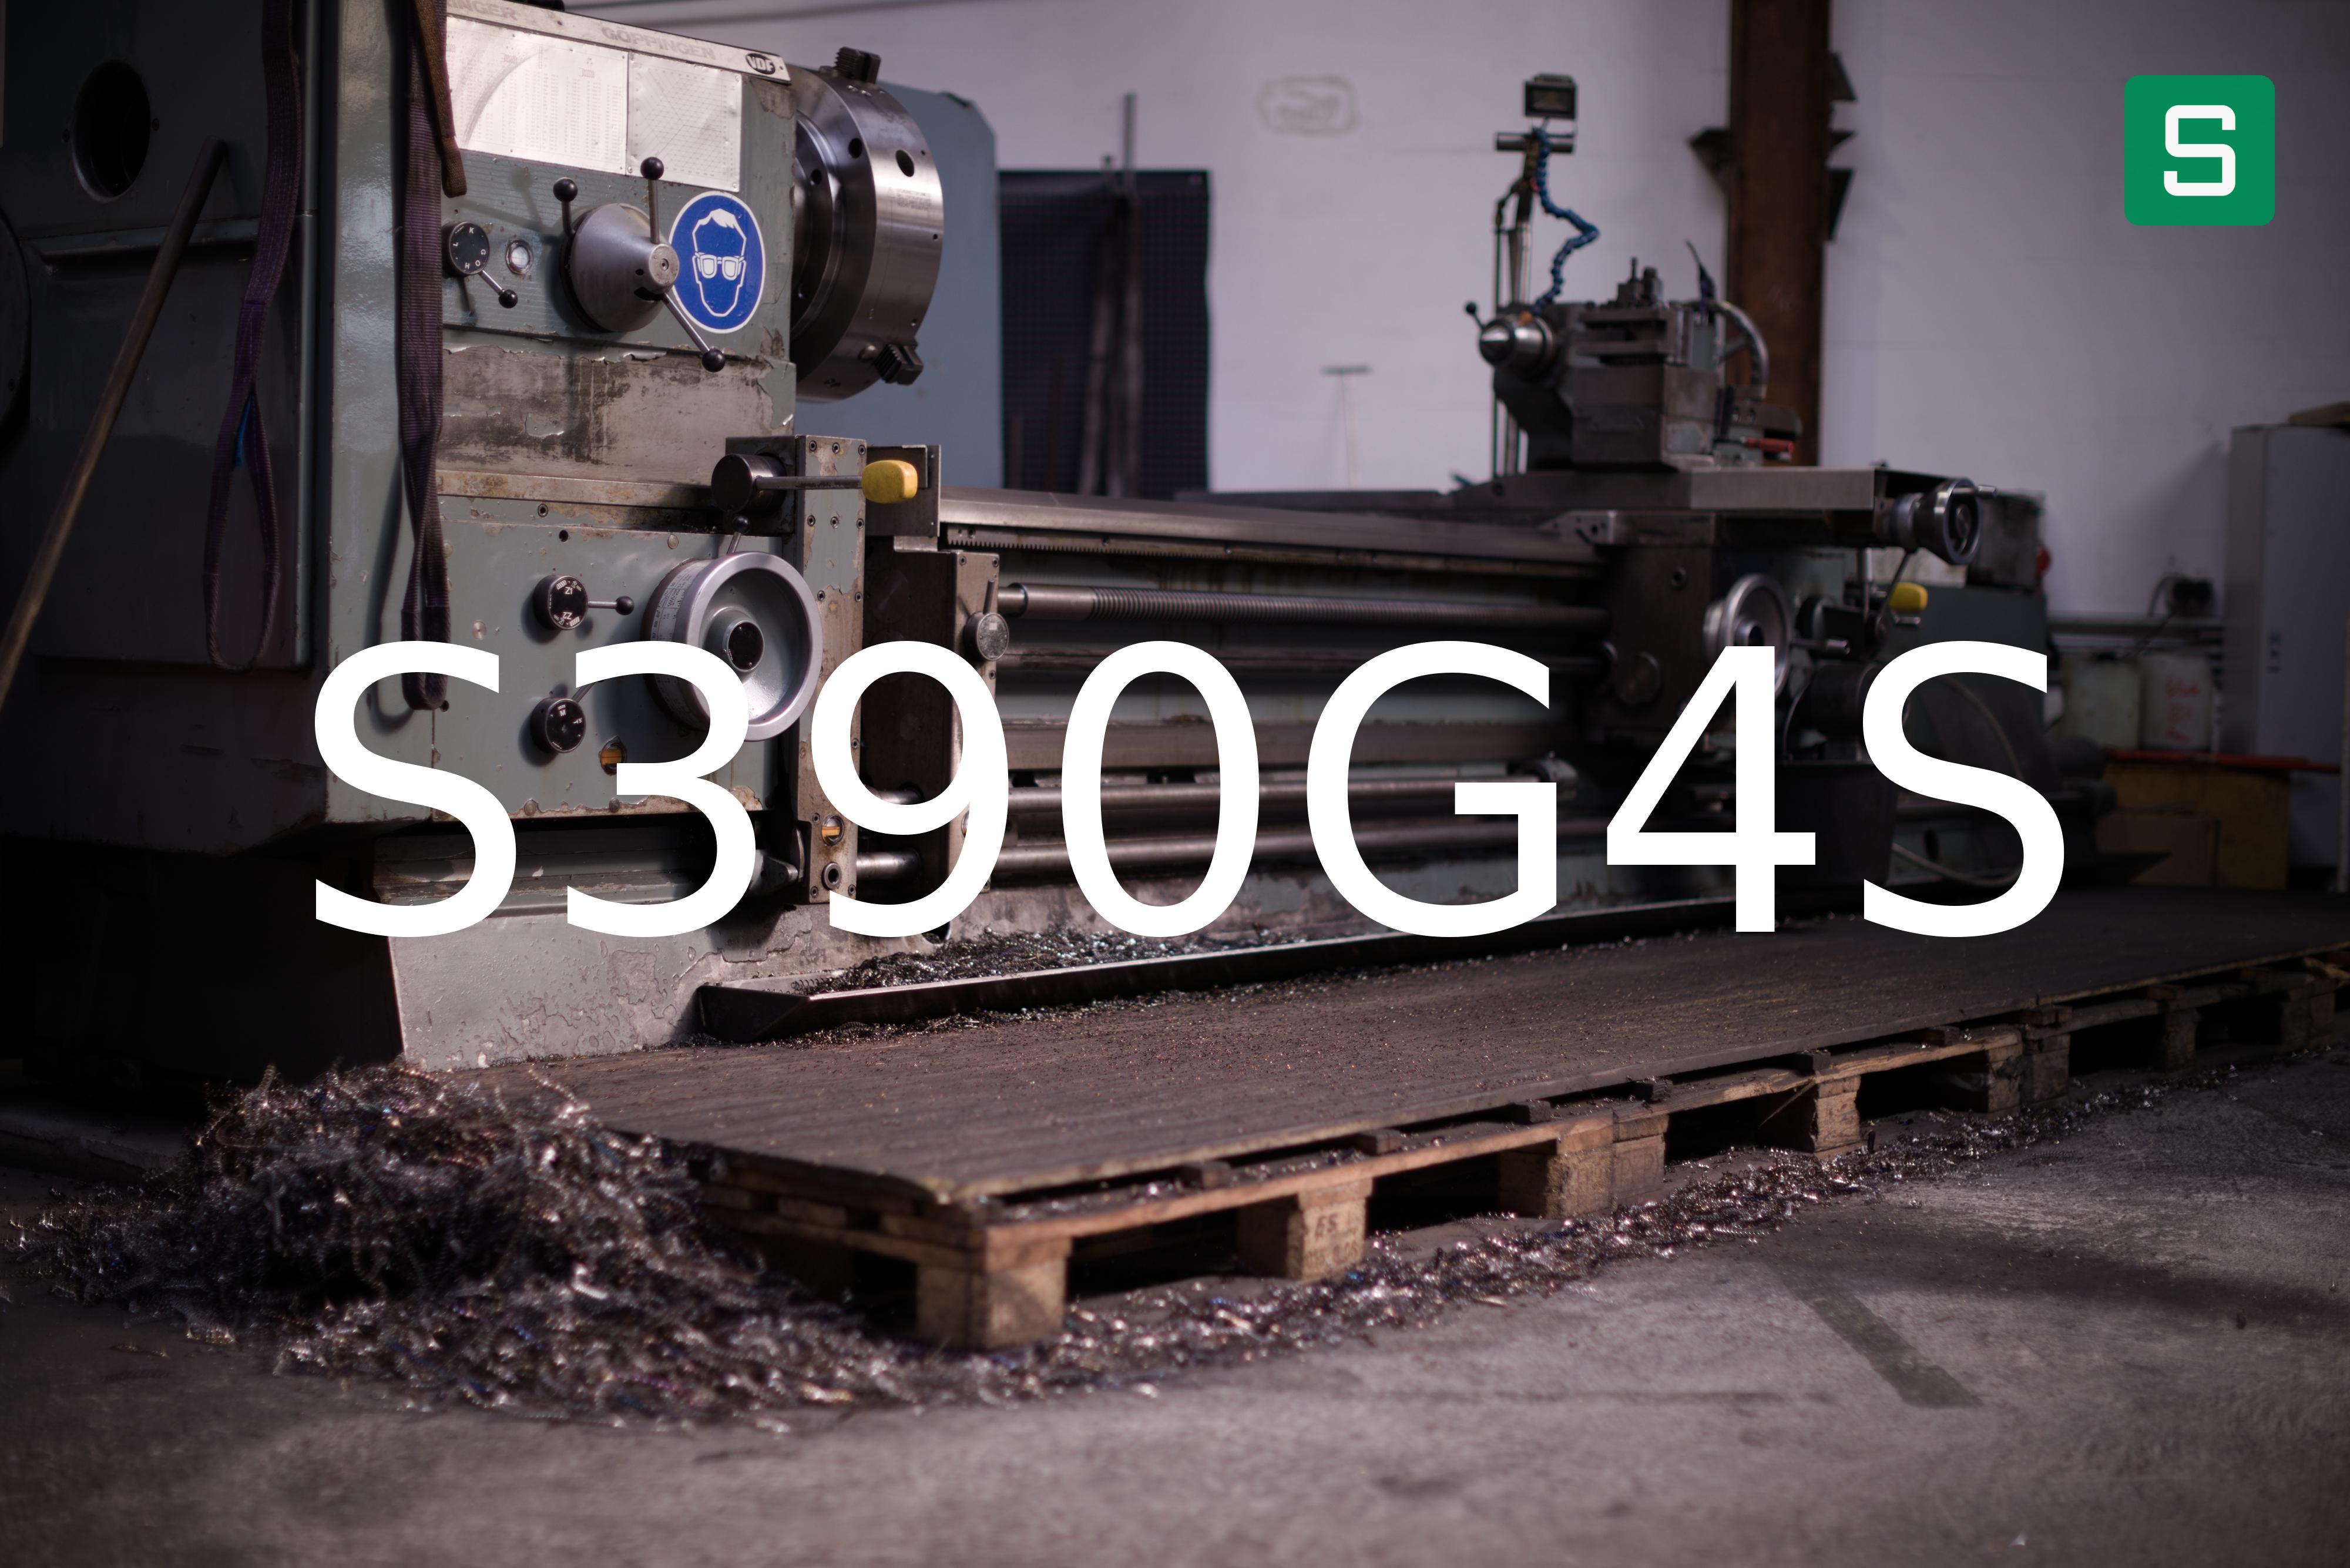 Steel Material: S390G4S